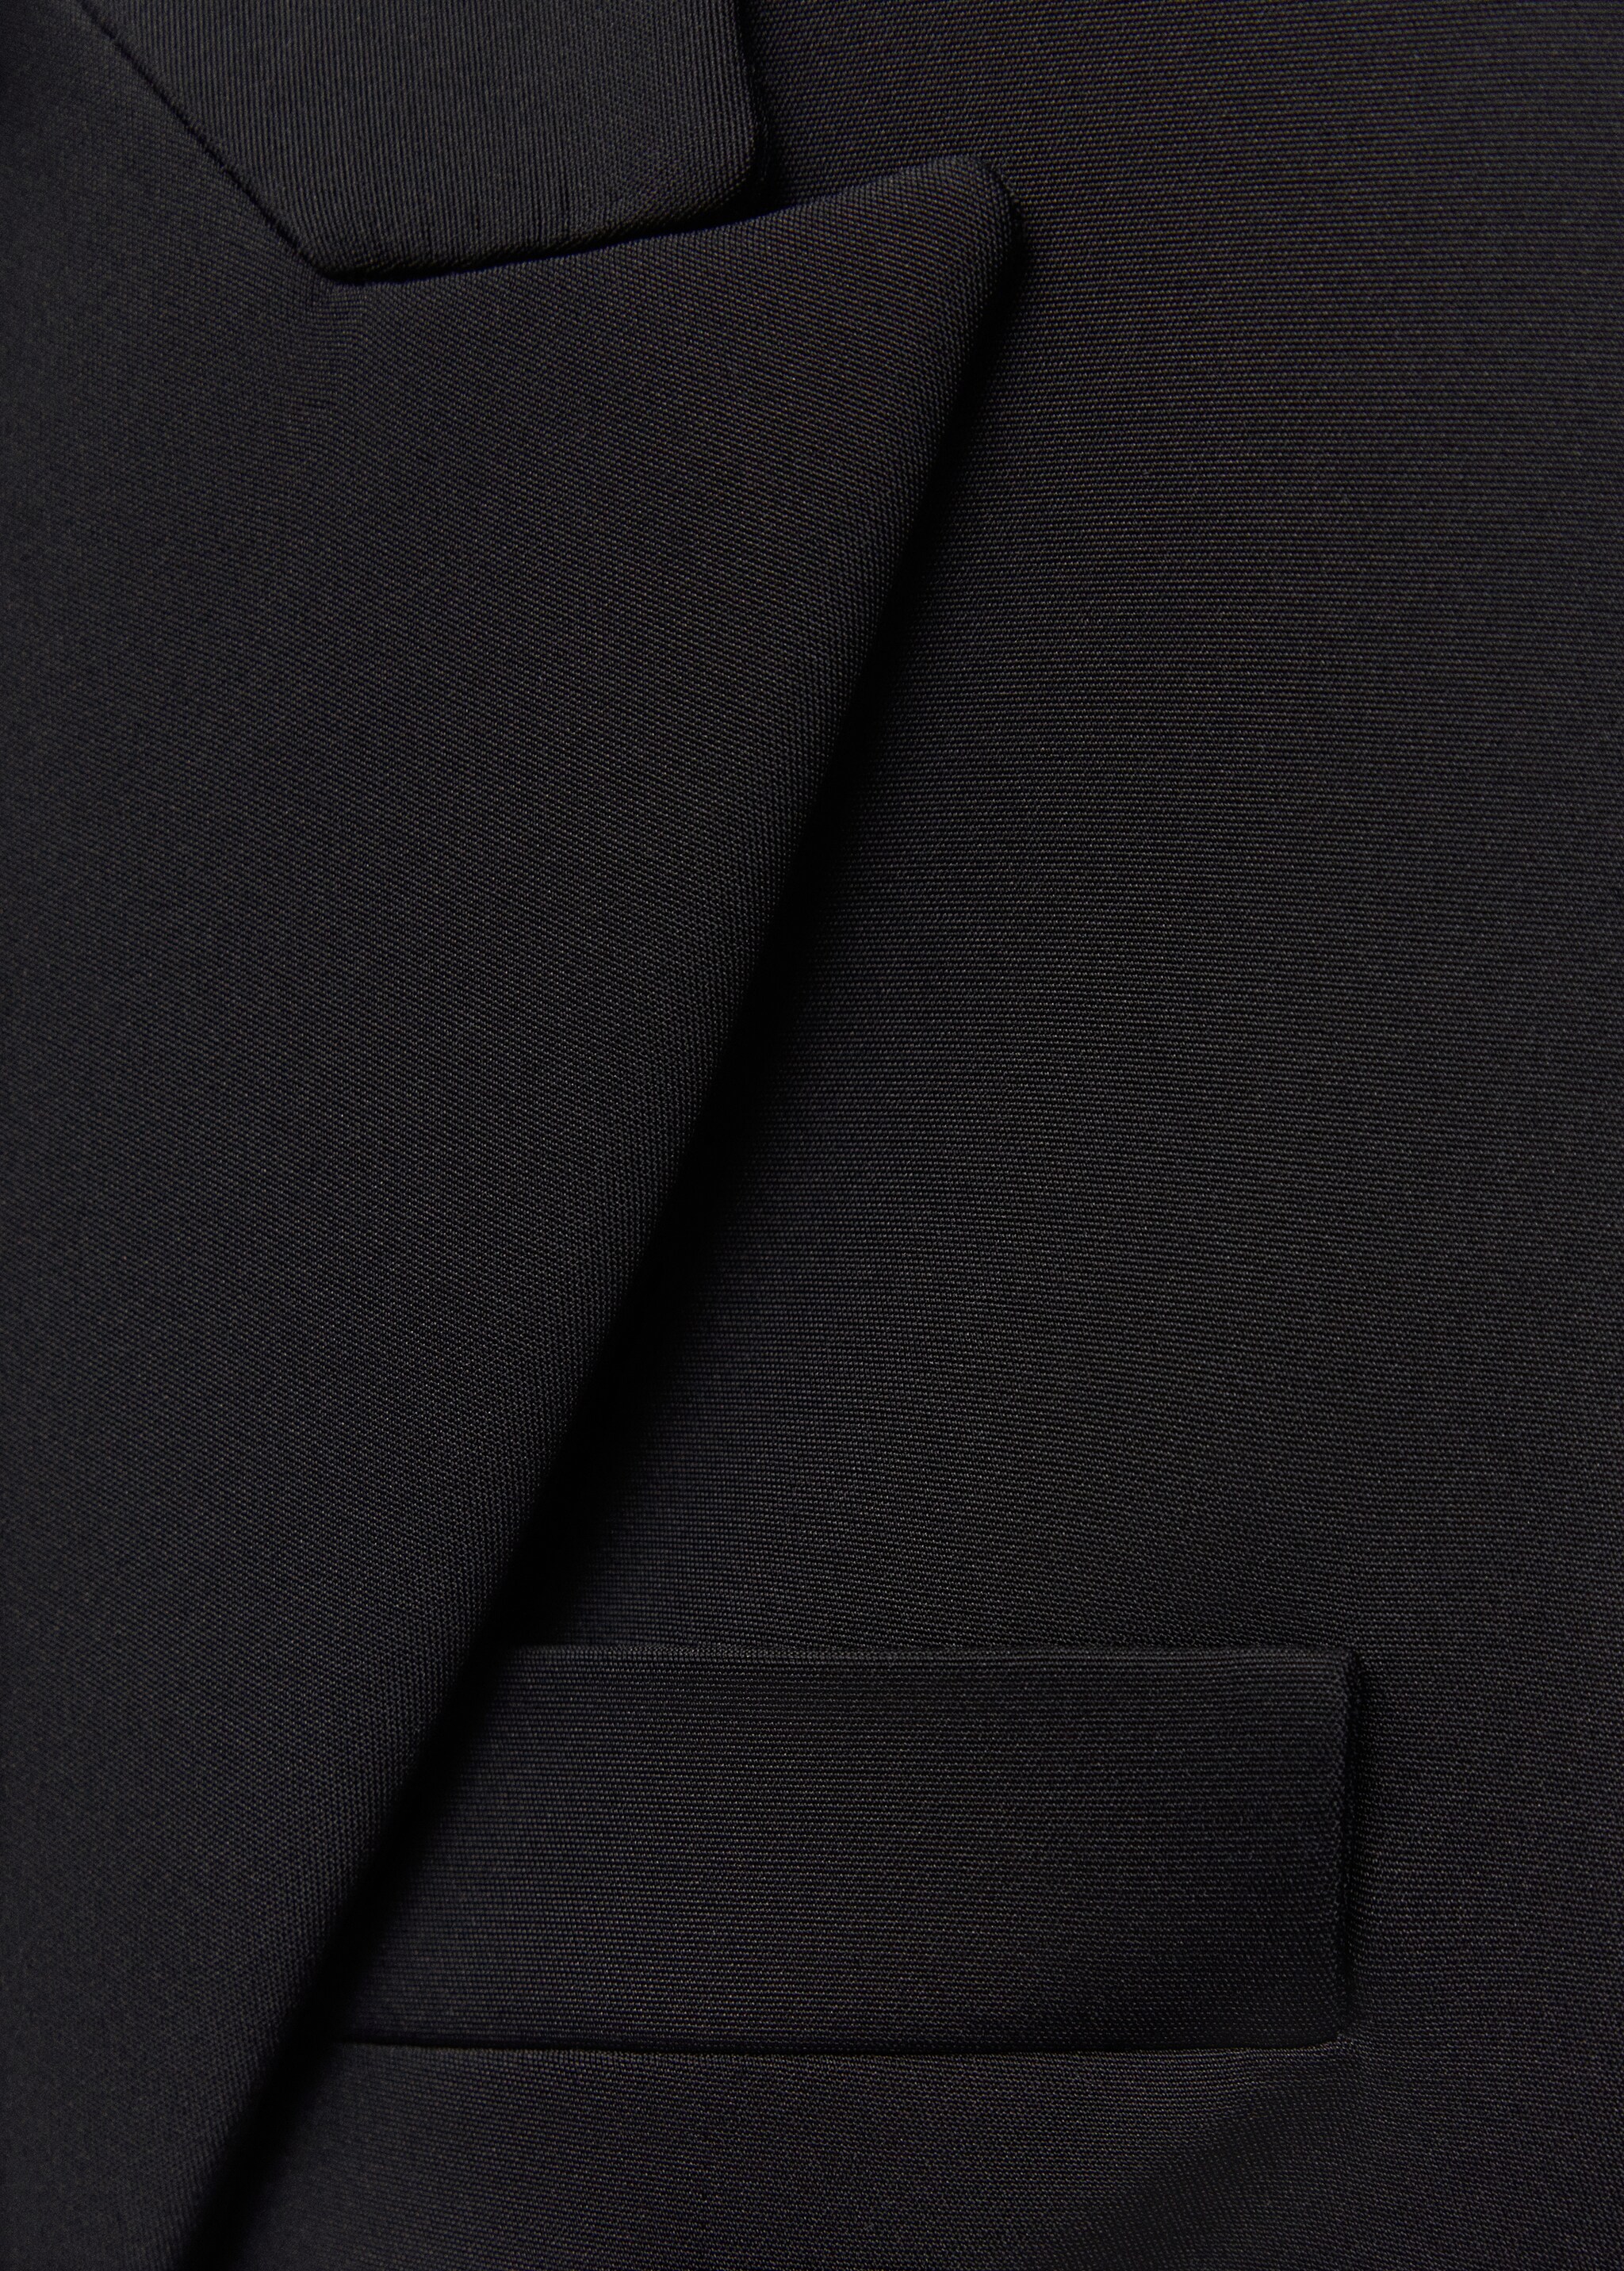 Fitted suit jacket - Details of the article 8